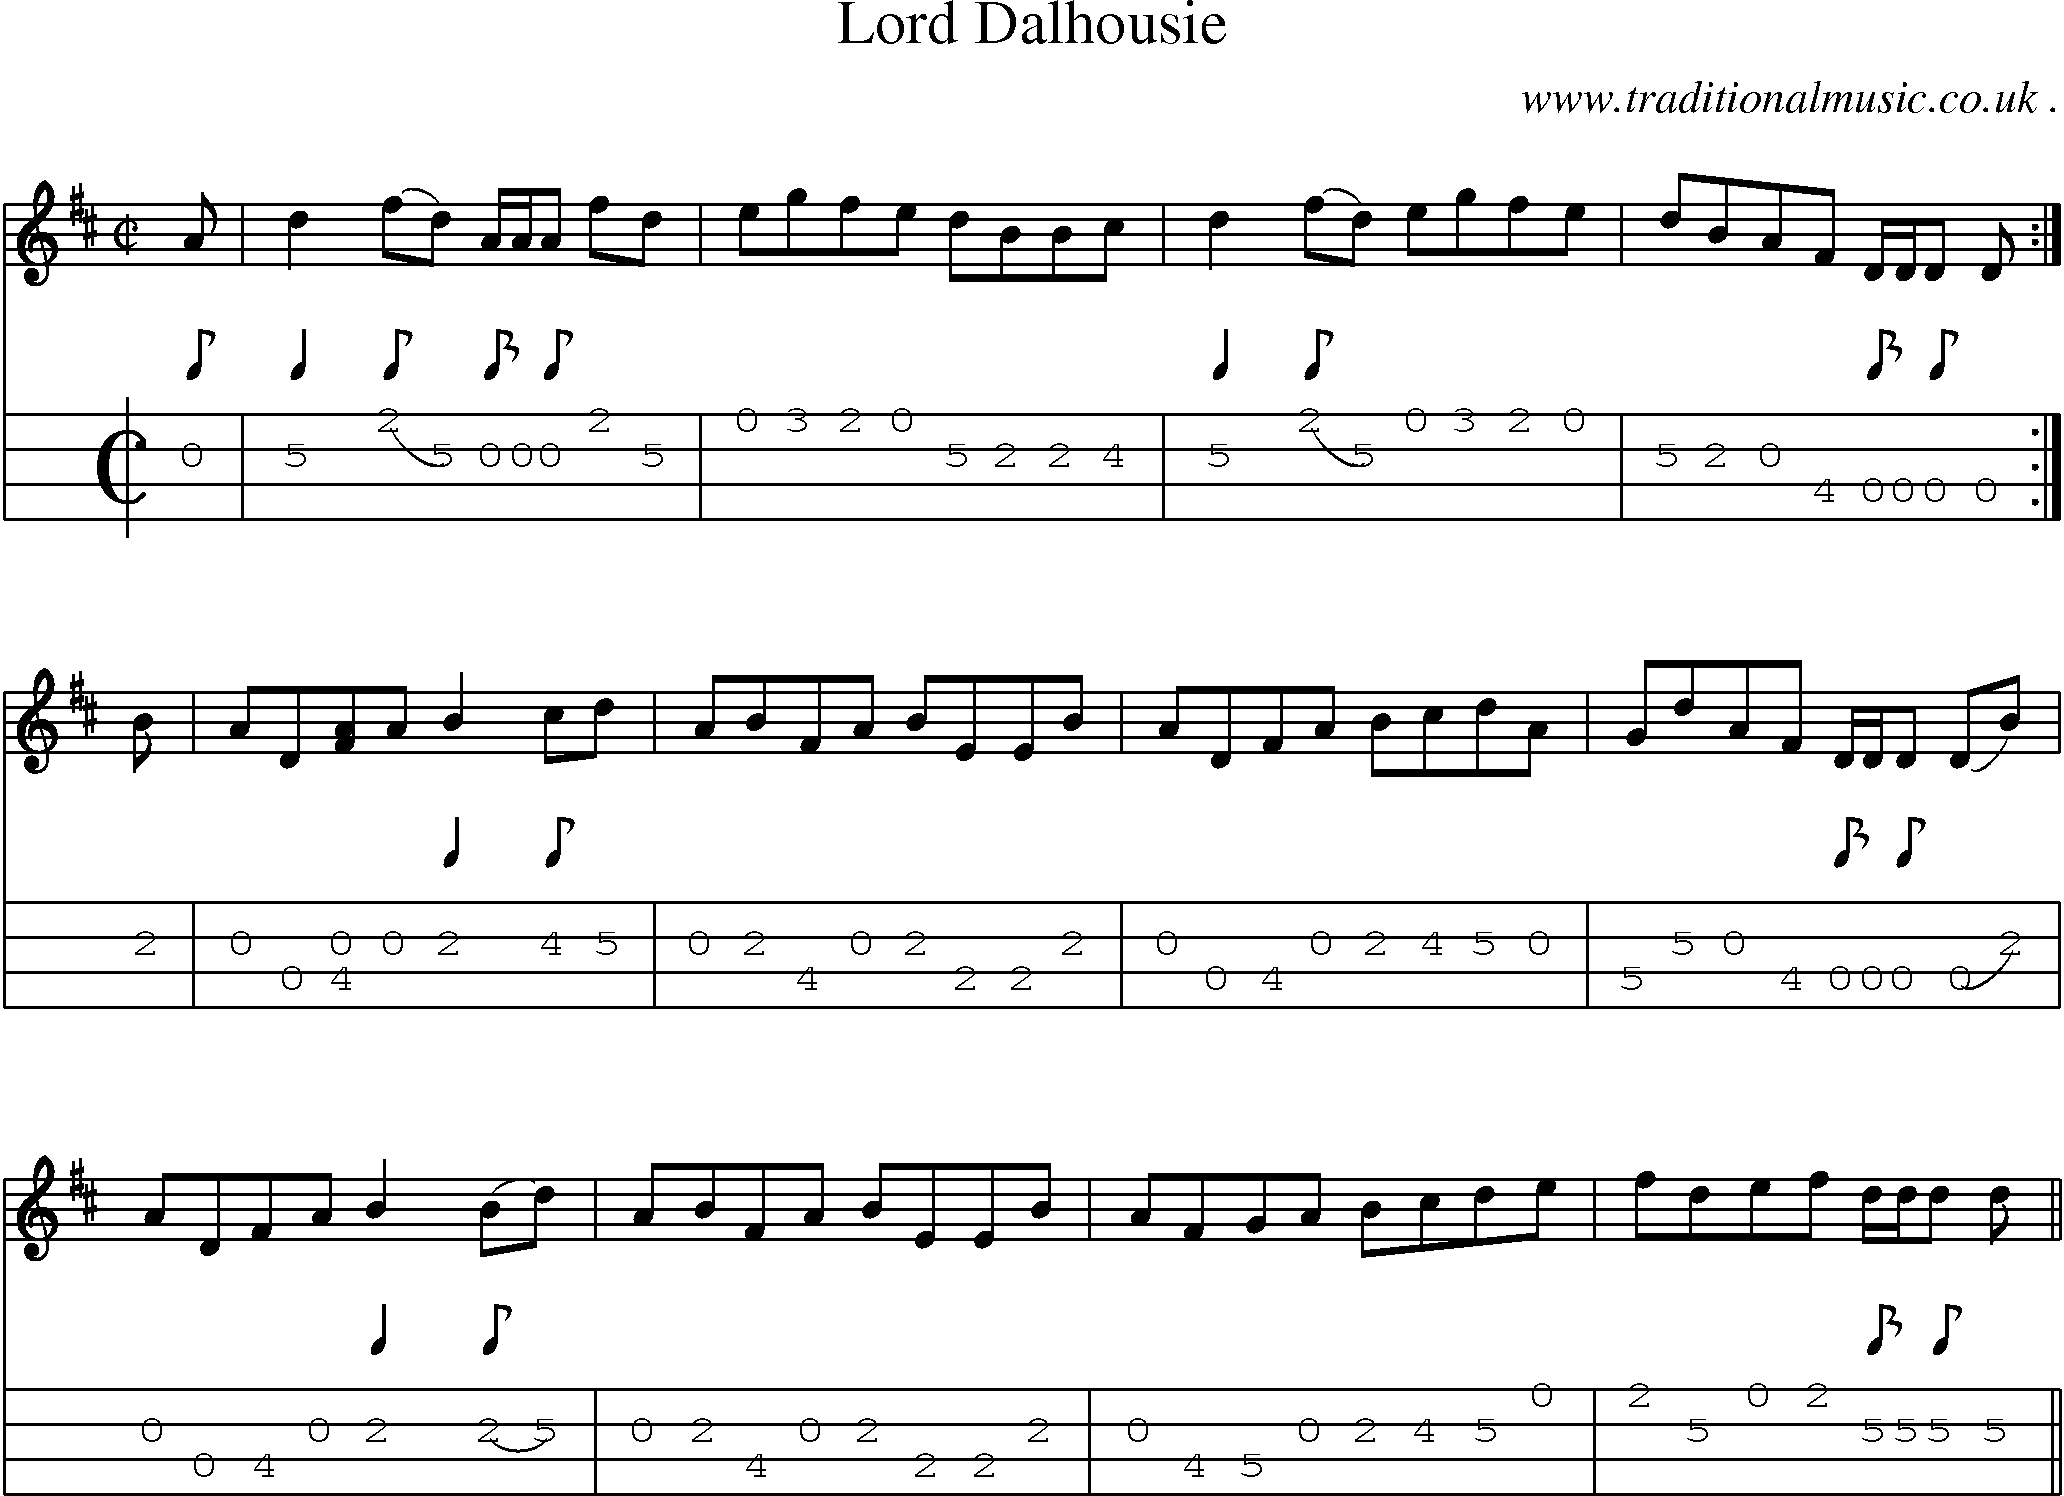 Sheet-music  score, Chords and Mandolin Tabs for Lord Dalhousie